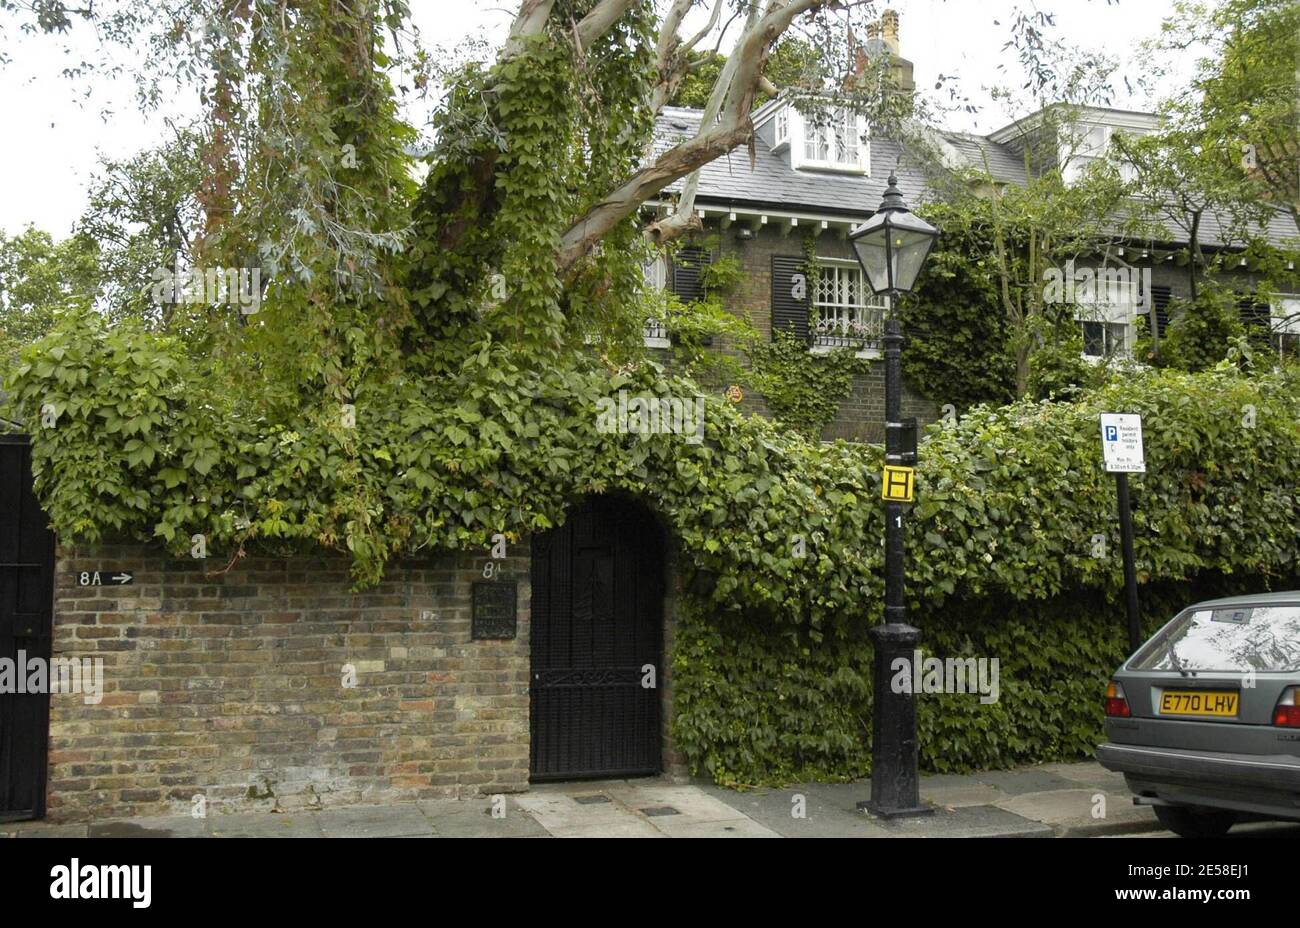 This is Kate Moss' London home, currently on the market for million, that she once shared with Babyshambles singer Pete Doherty. The model has reportedly moved out of the after